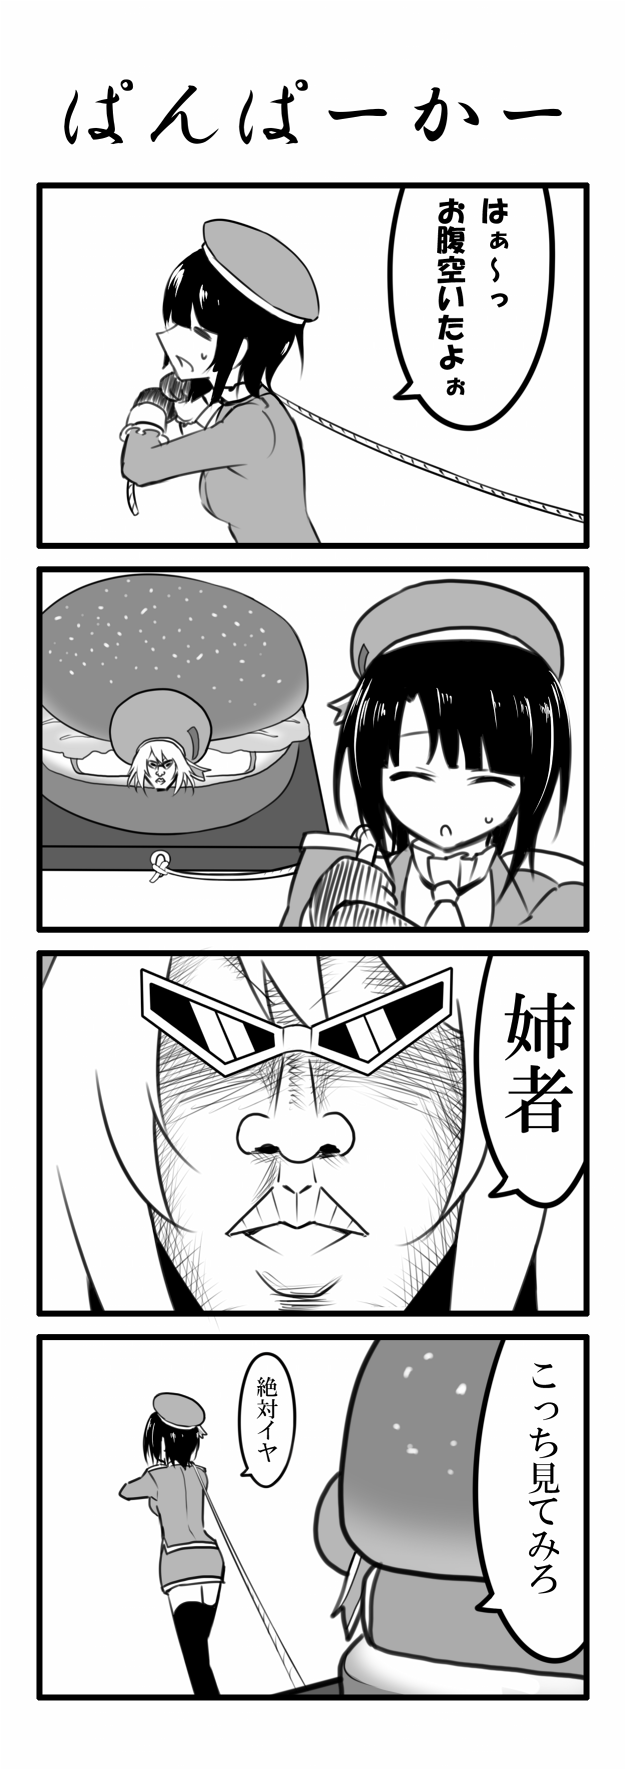 2girls 4koma ^_^ atago_(kantai_collection) beret closed_eyes comic gloves hat highres kantai_collection mattari_yufi monochrome multiple_girls open_mouth pulling rope short_hair skirt takao_(kantai_collection) thighhighs translation_request